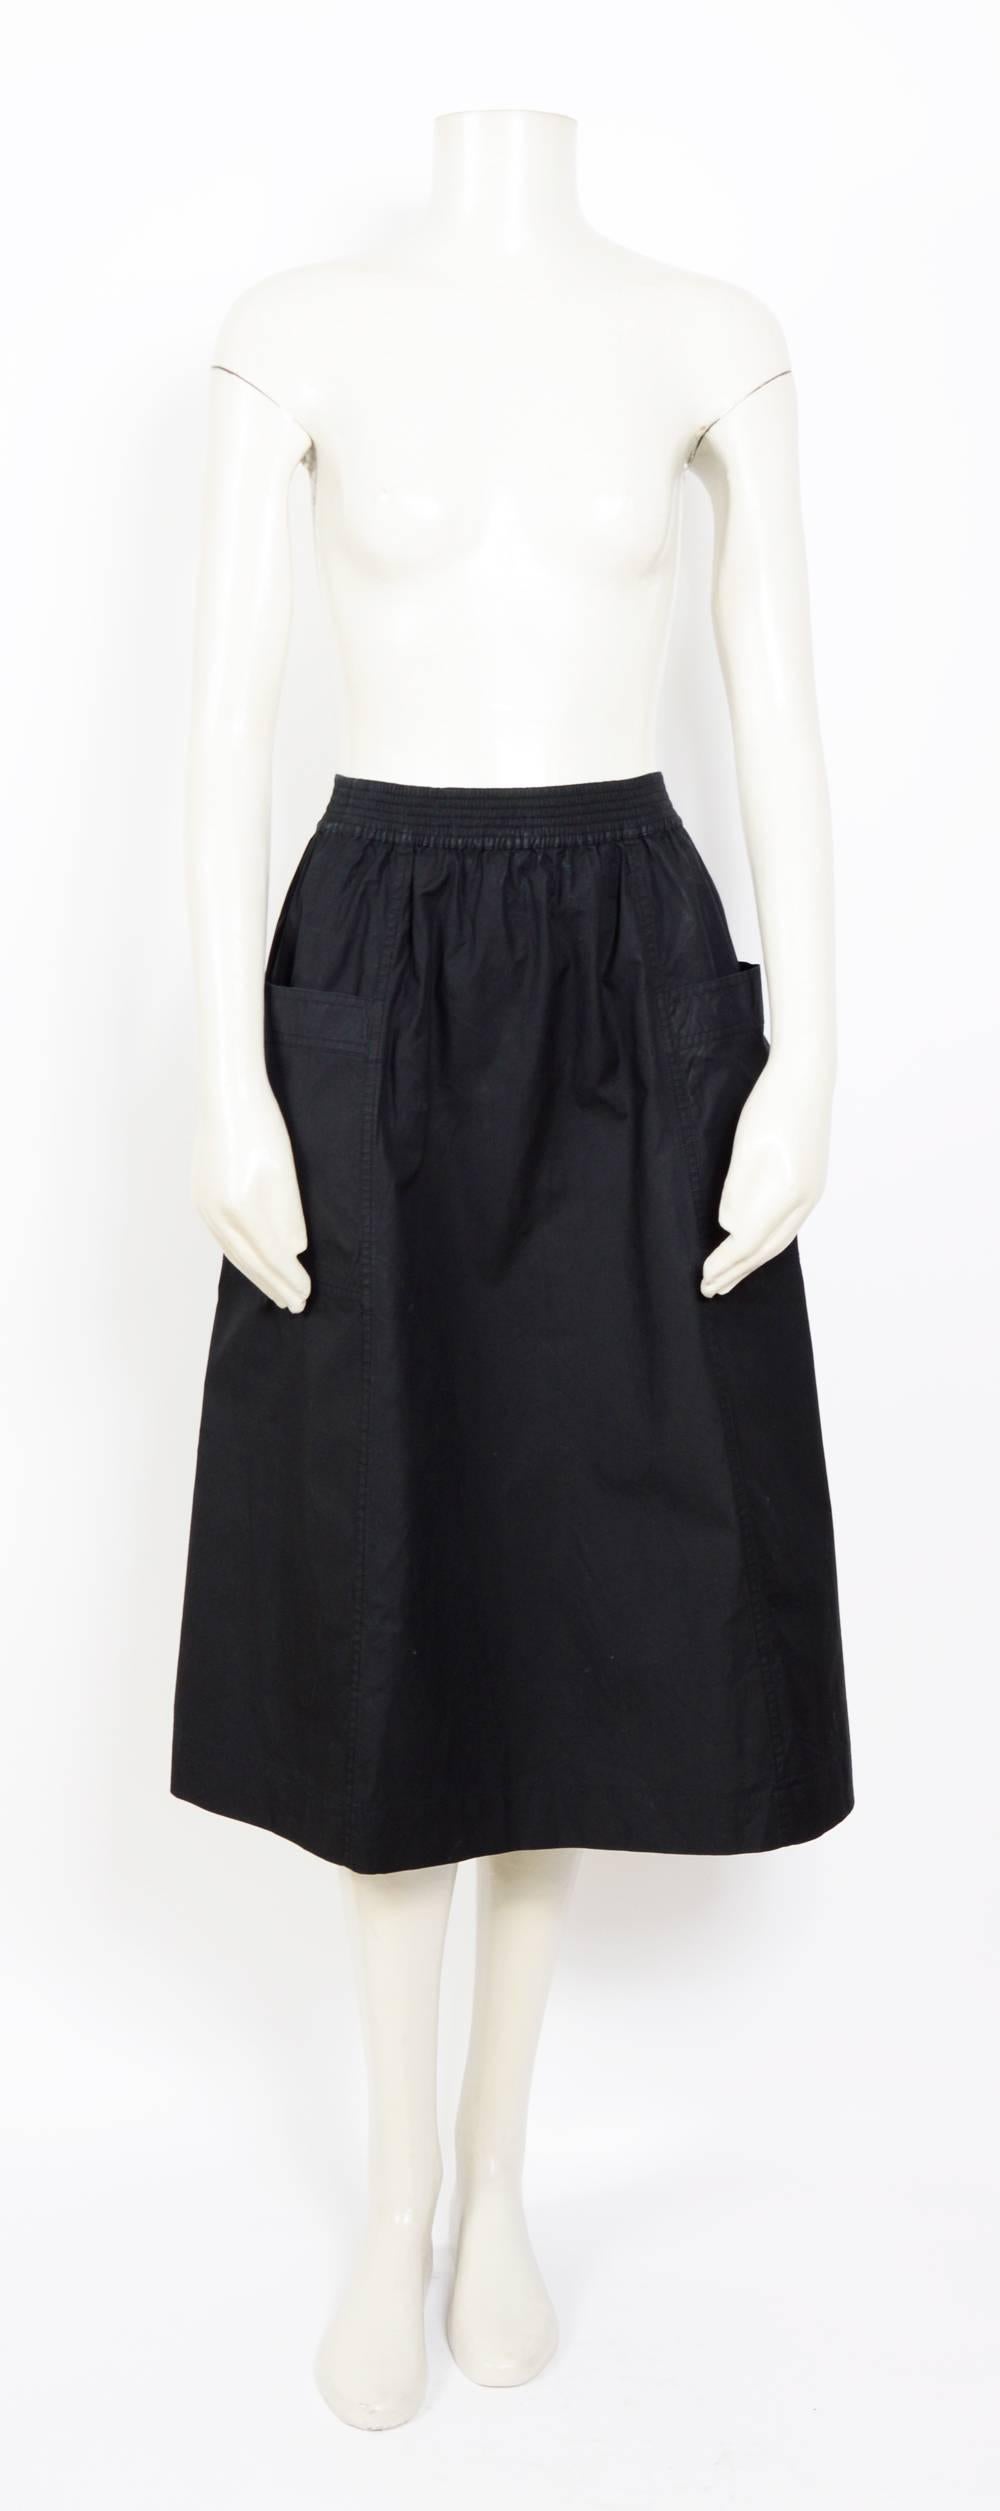 Beautiful crispy strong cotton black slip-on skirt by Yves Saint Laurent.
Elastic waist, big front pockets not lined. 
Perfect for spring/summer
French 36
Measurements are taken flat:
Waist unstretched 11,5inch/29cm(x2) - Stretched 14,5inch/37cm(x2)